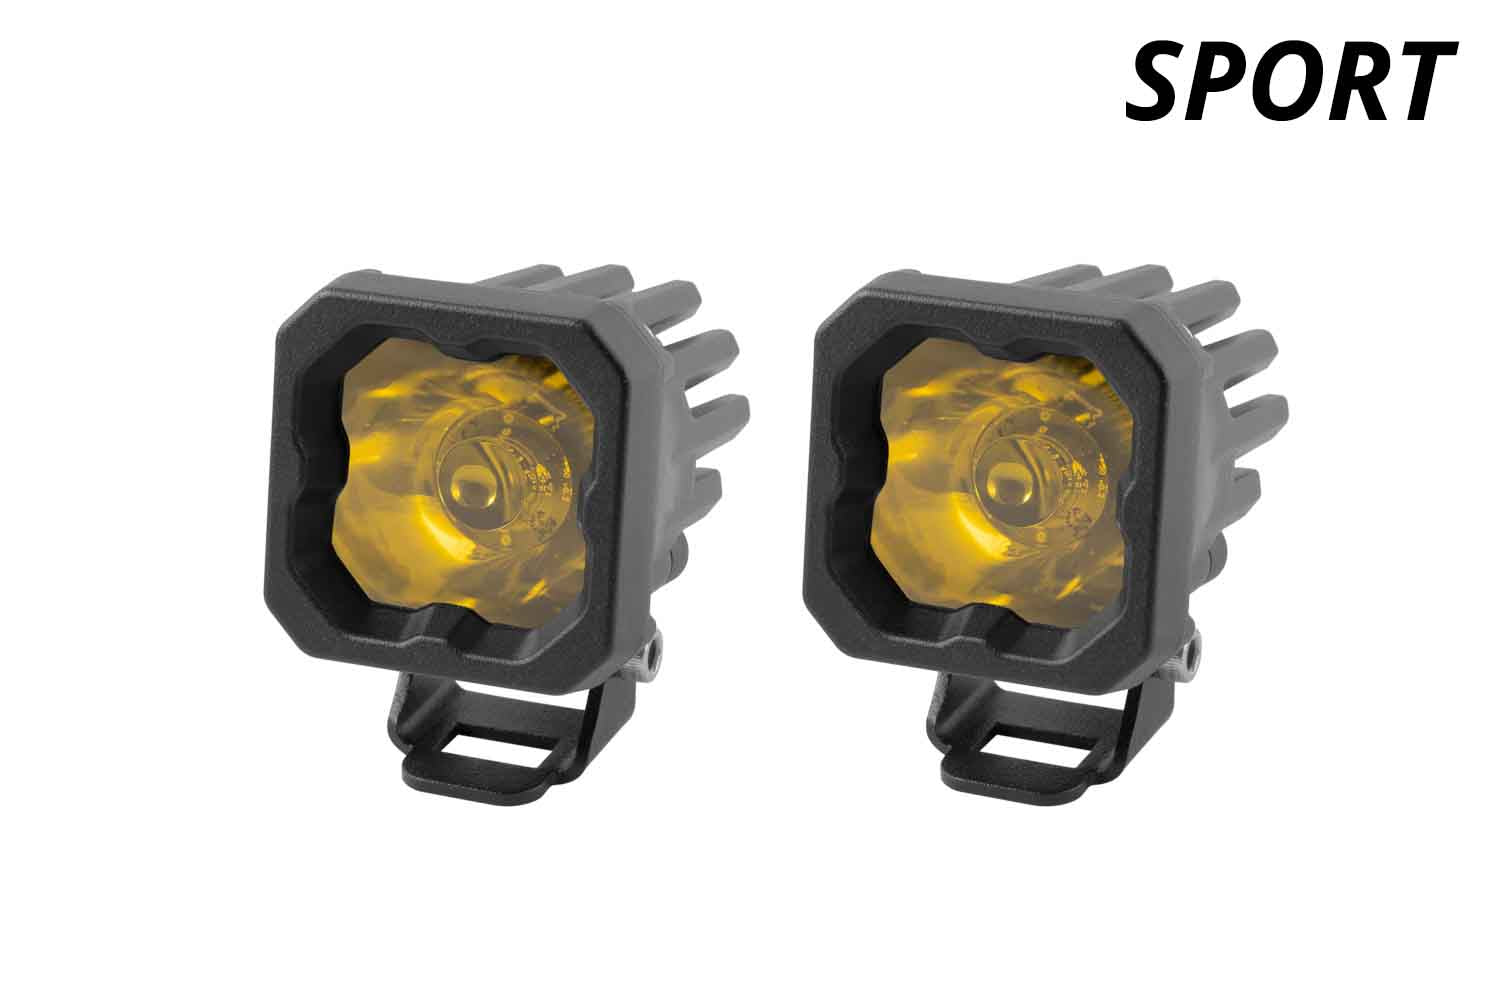 Diode Dynamics Stage Series C1 LED Pod Sport Yellow Wide Standard ABL Pair DD6443P